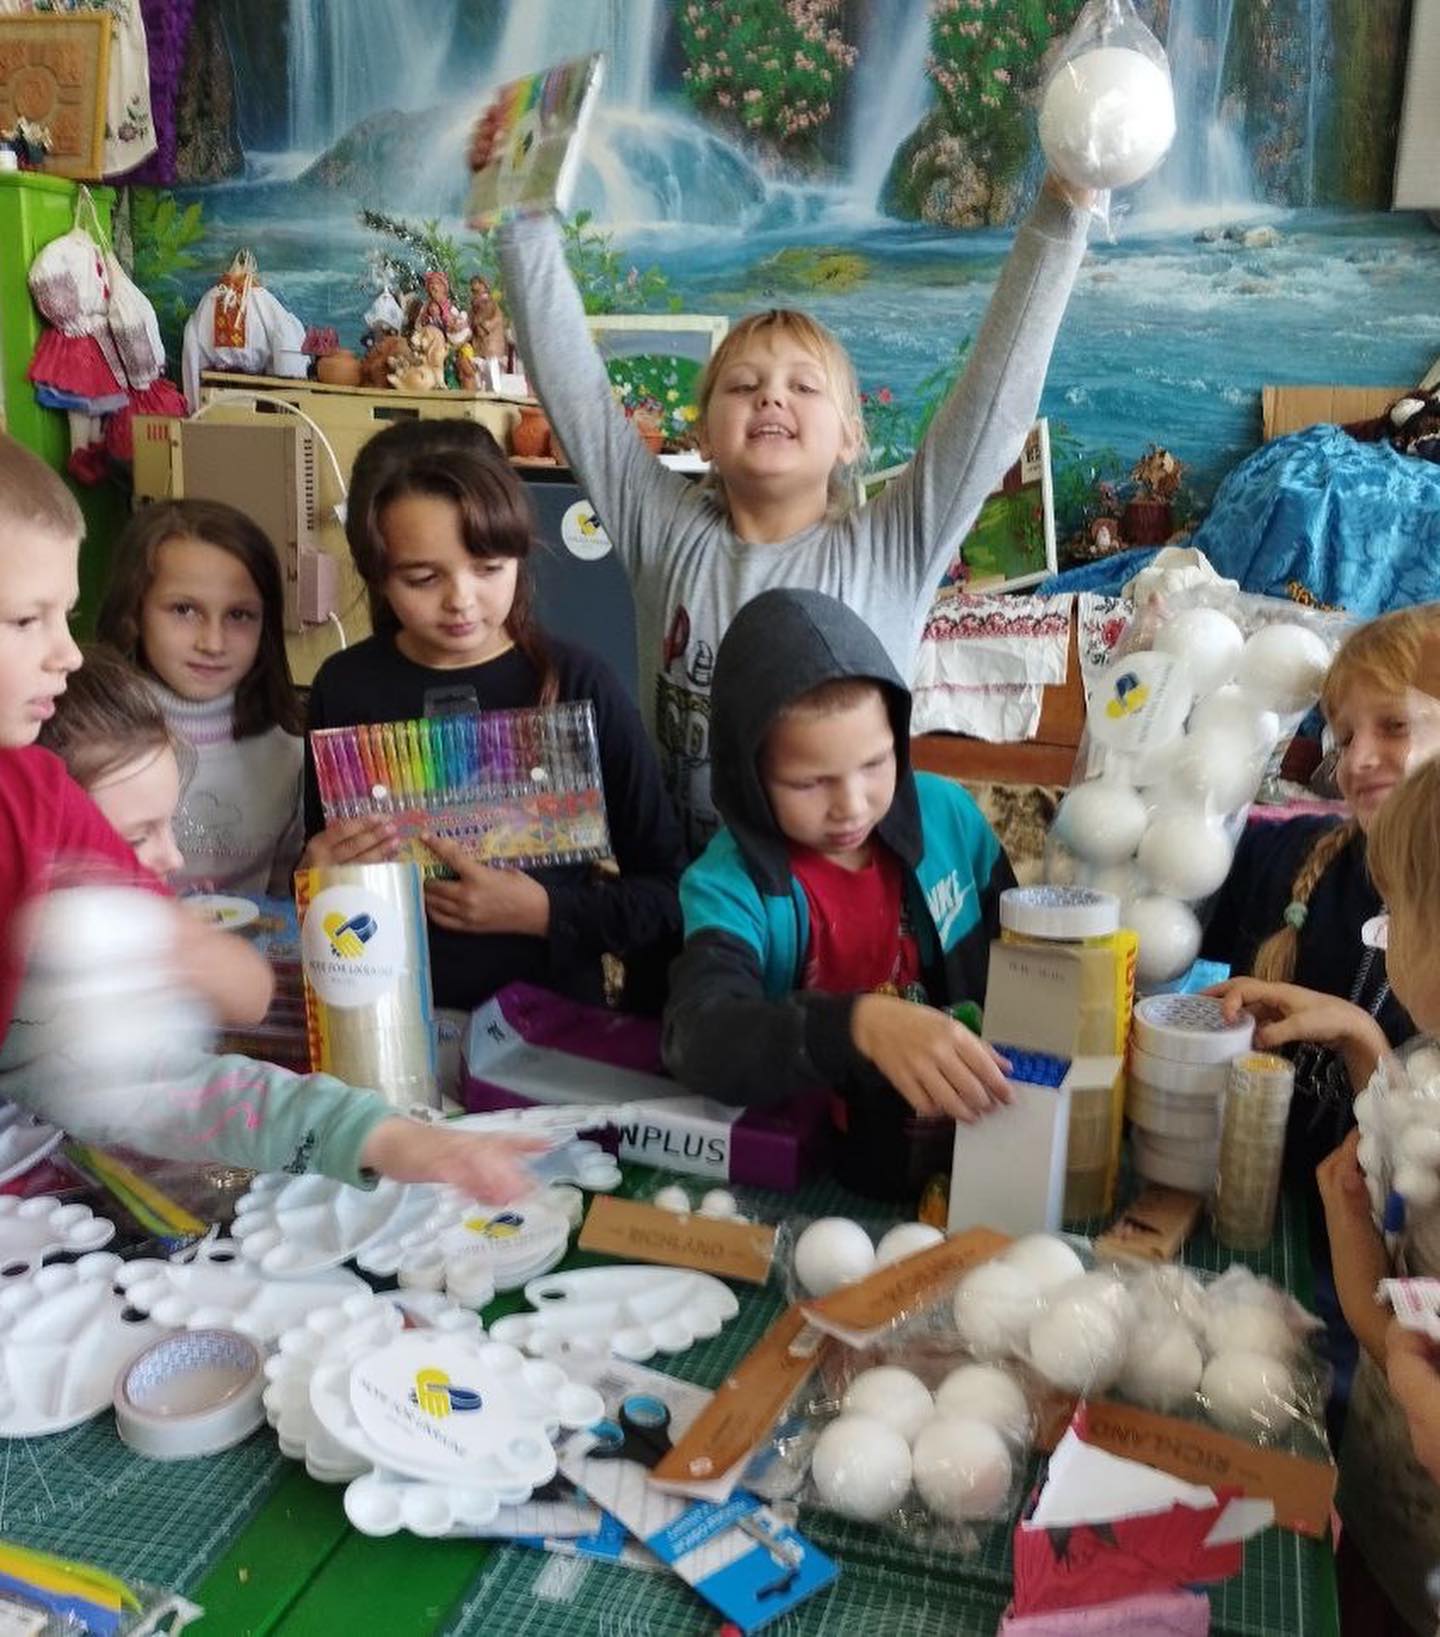 A group of children are sitting around a table making crafts.